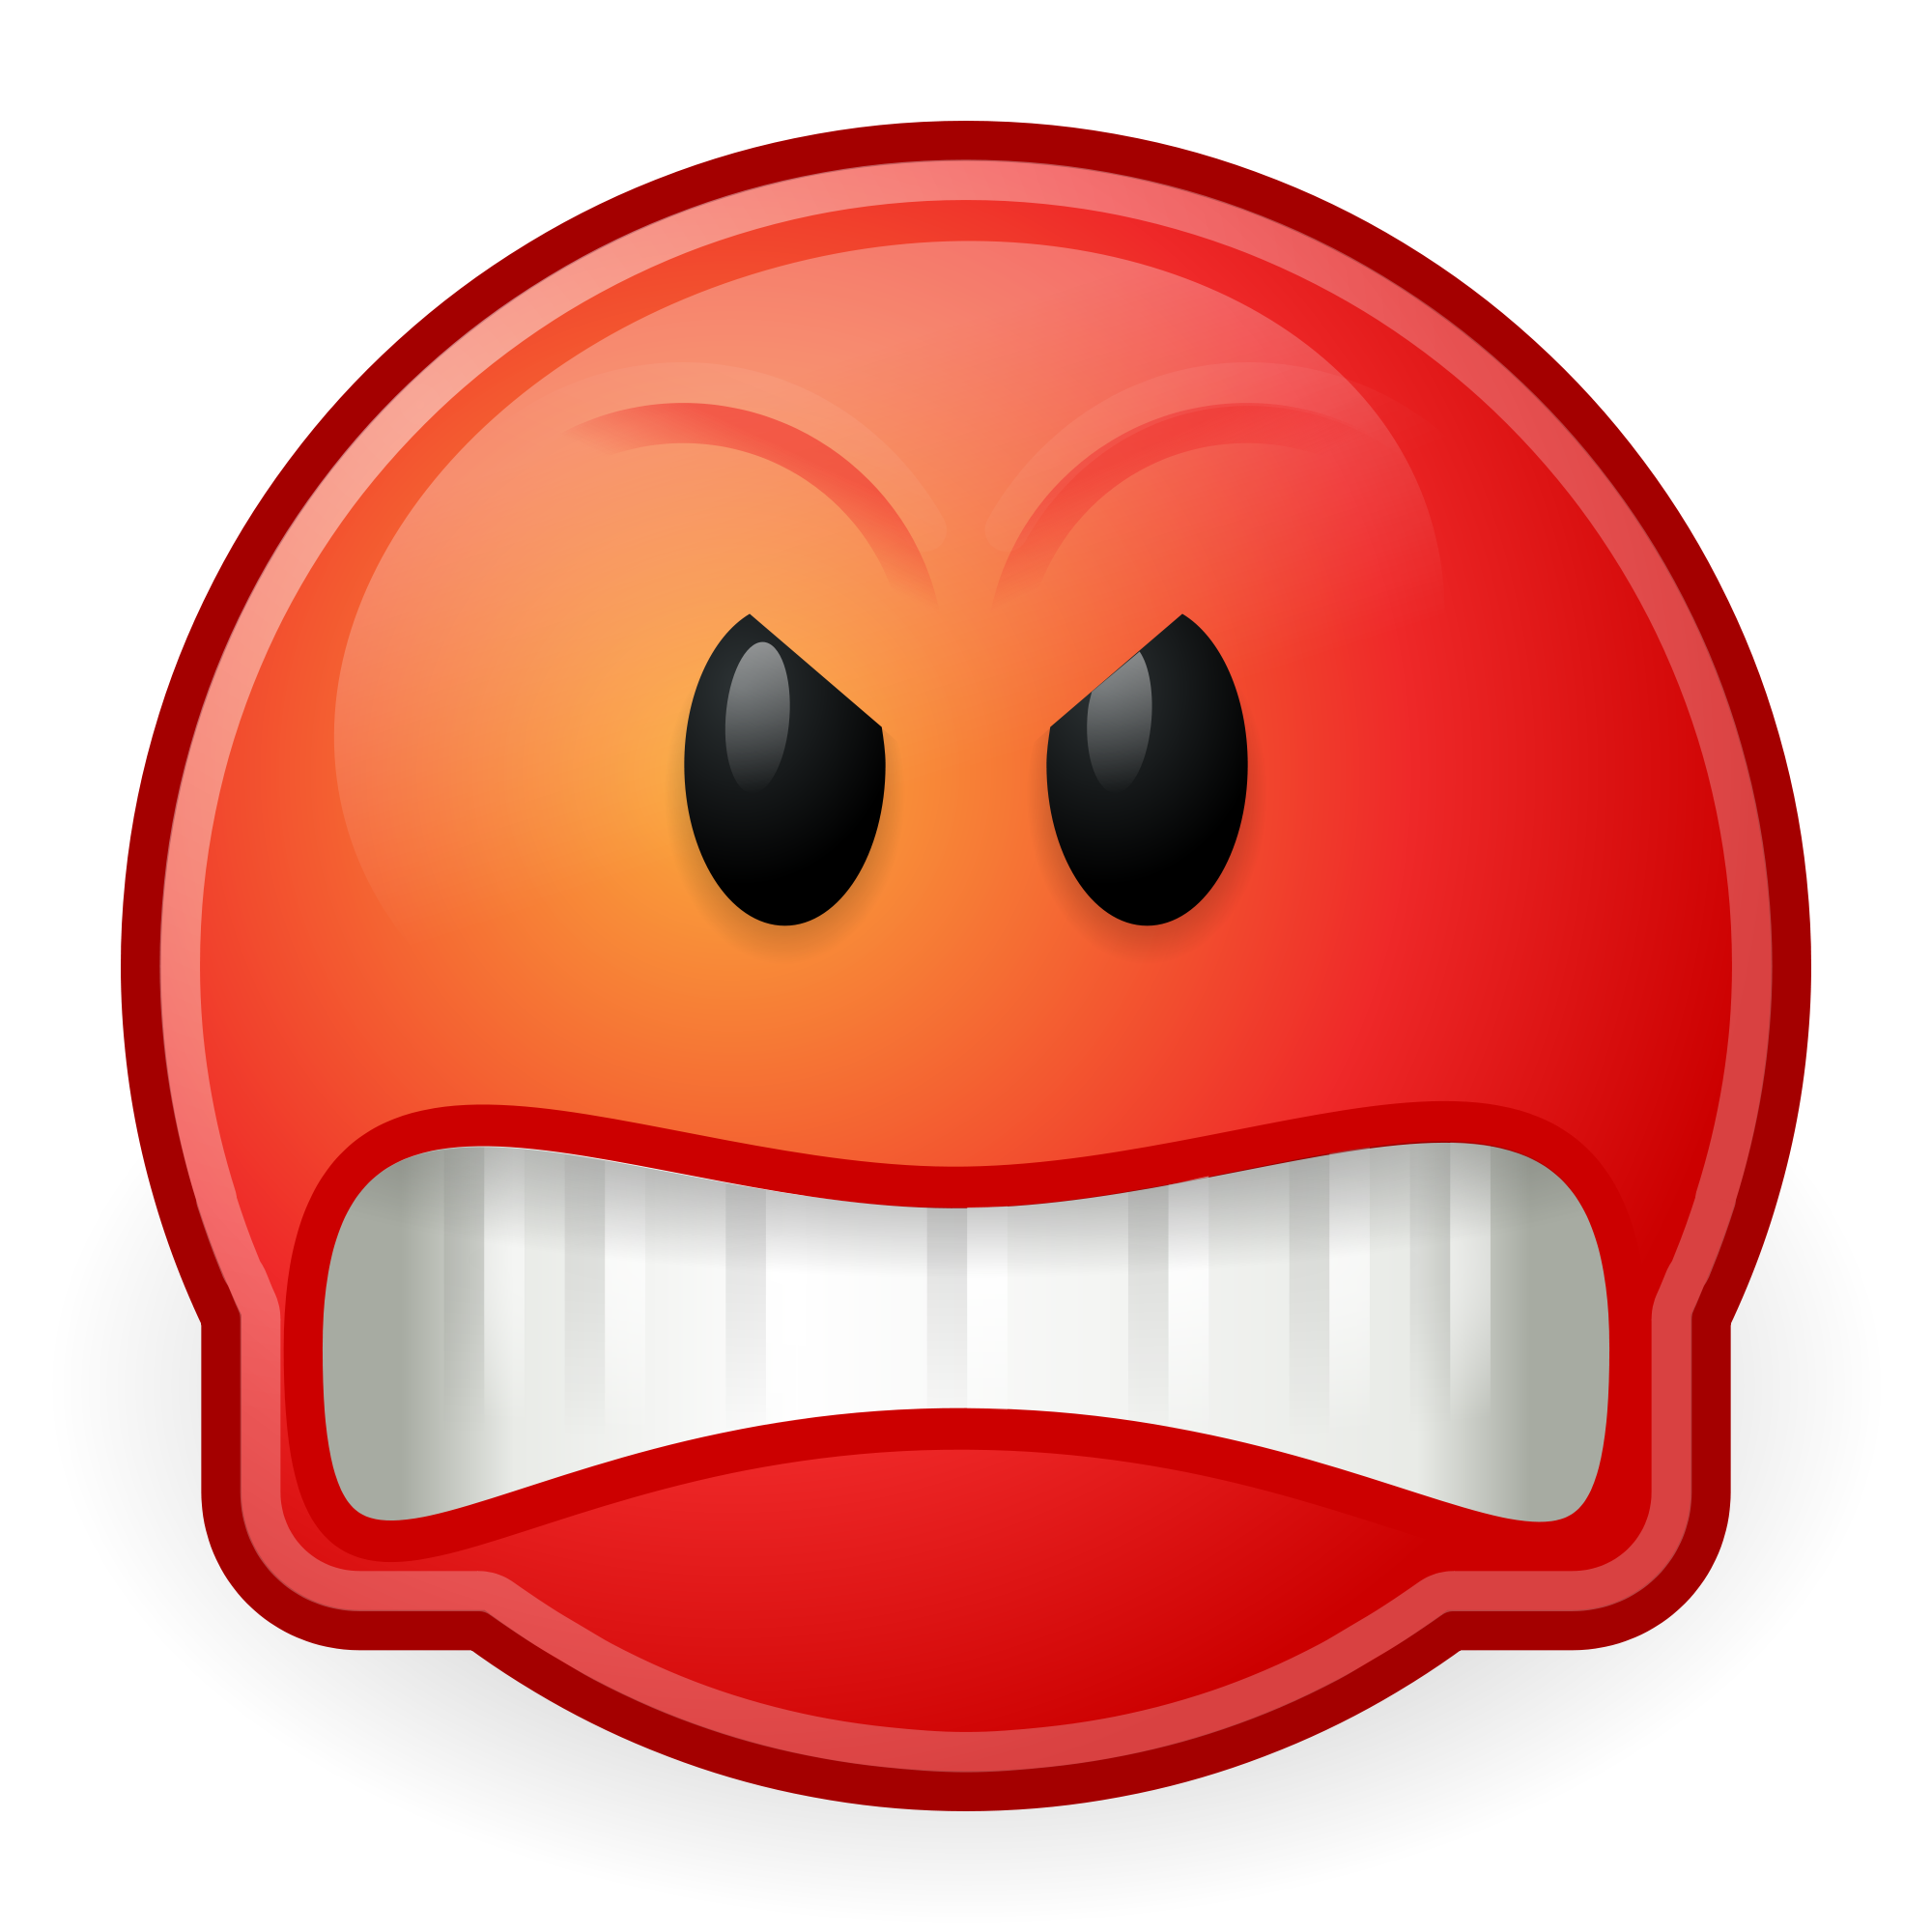 Red Angry Emoticon - ClipArt Best